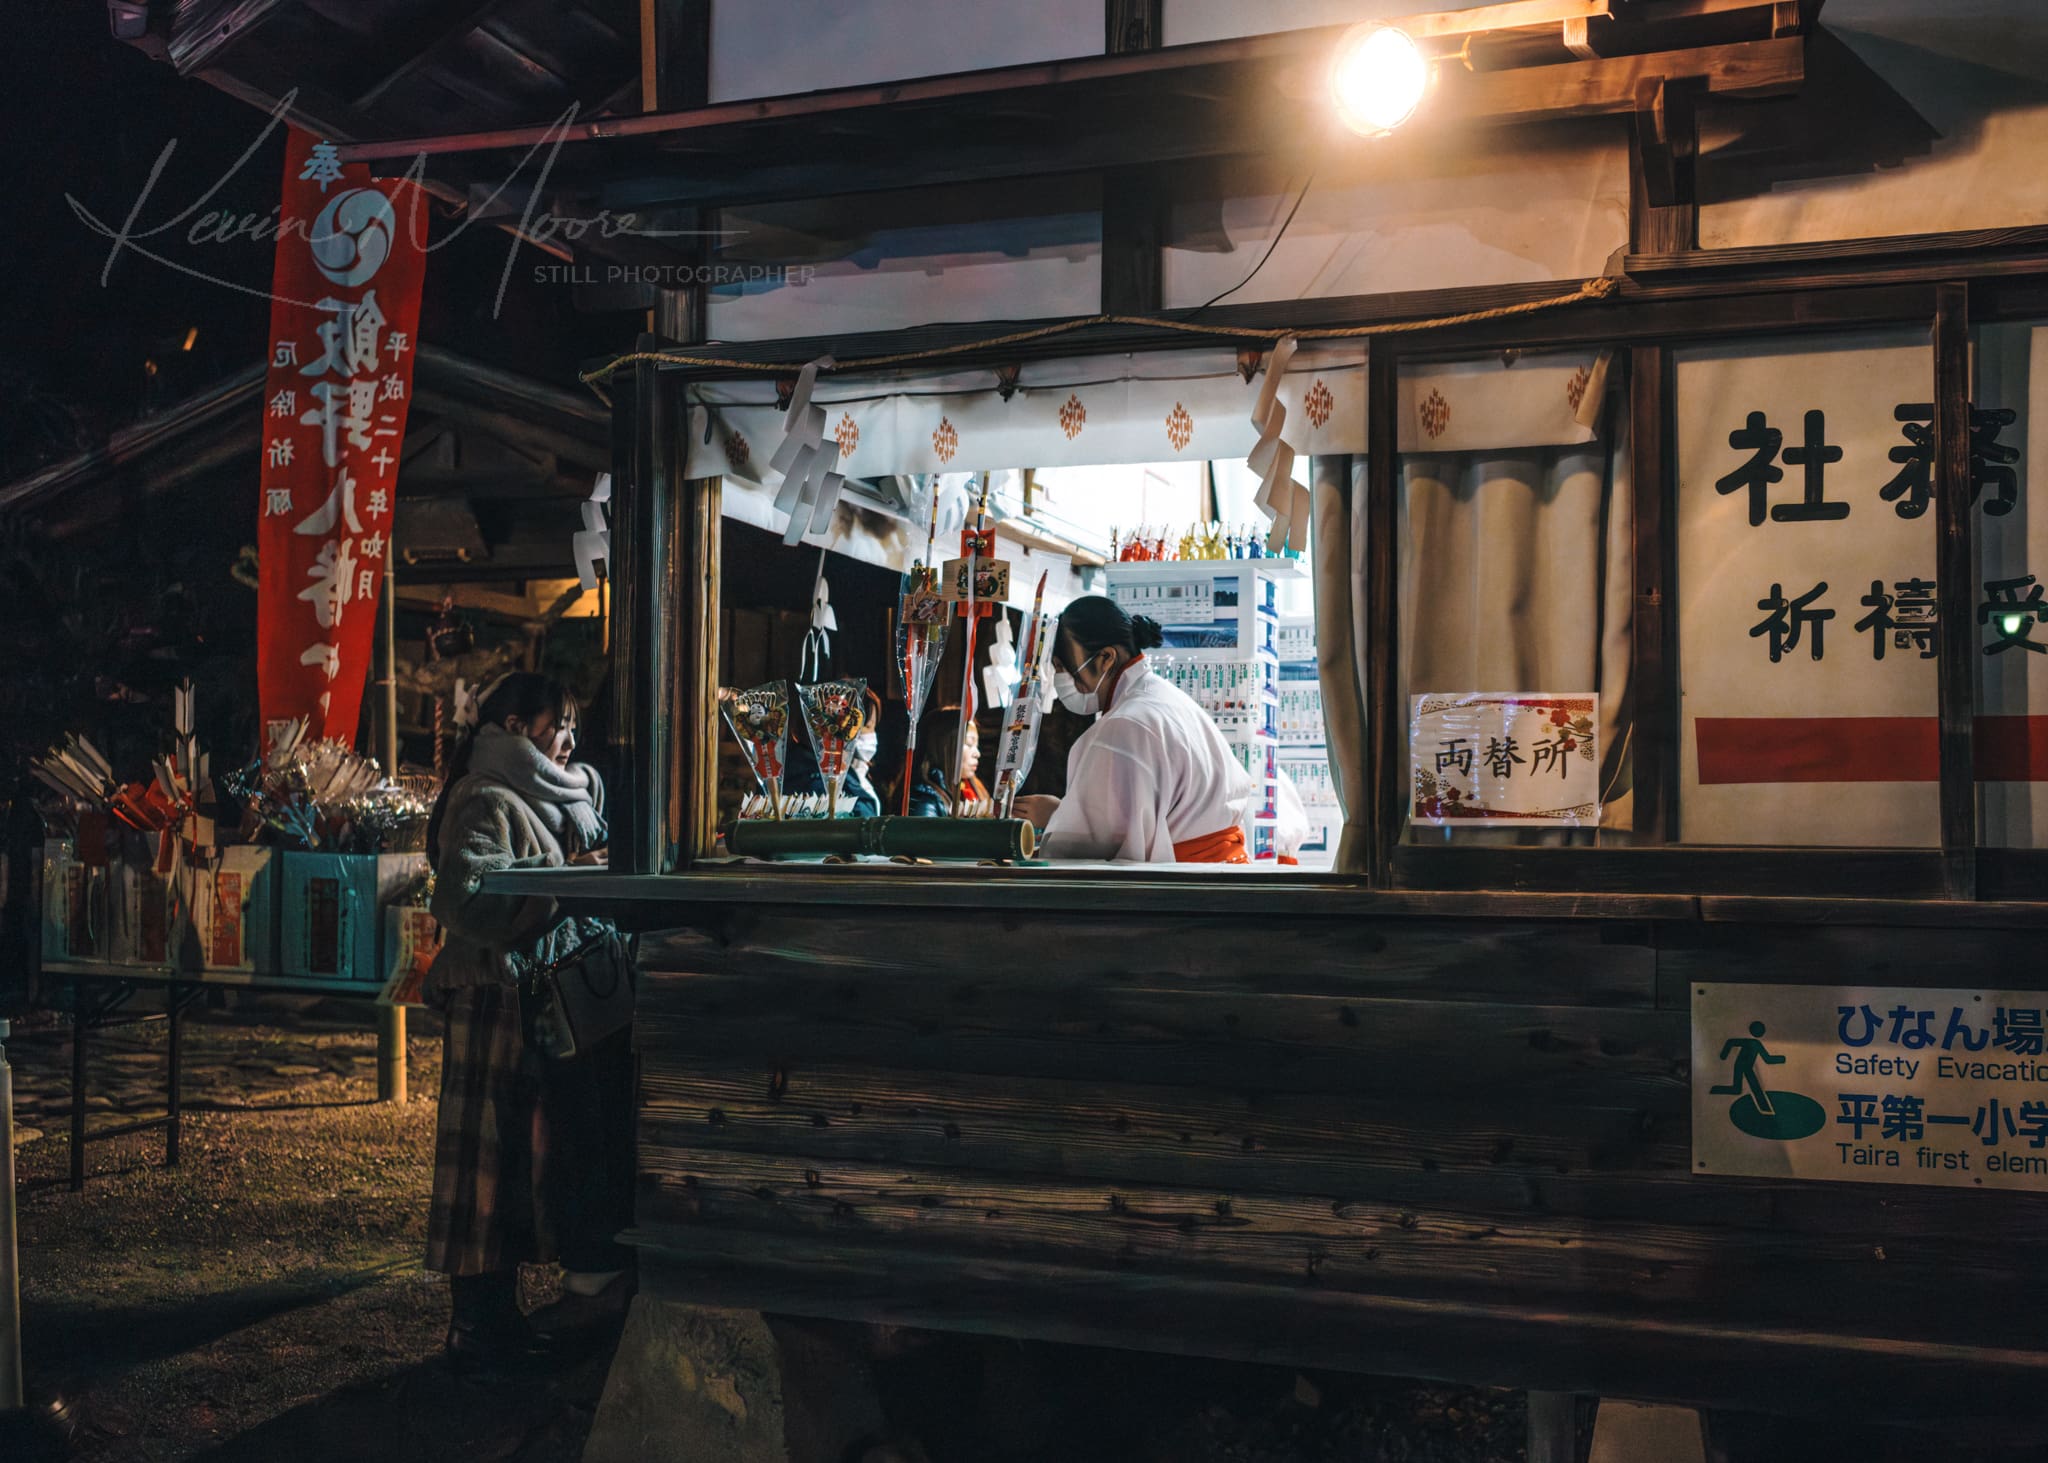 Woman at a traditional Japanese shrine at night buying religious souvenirs.